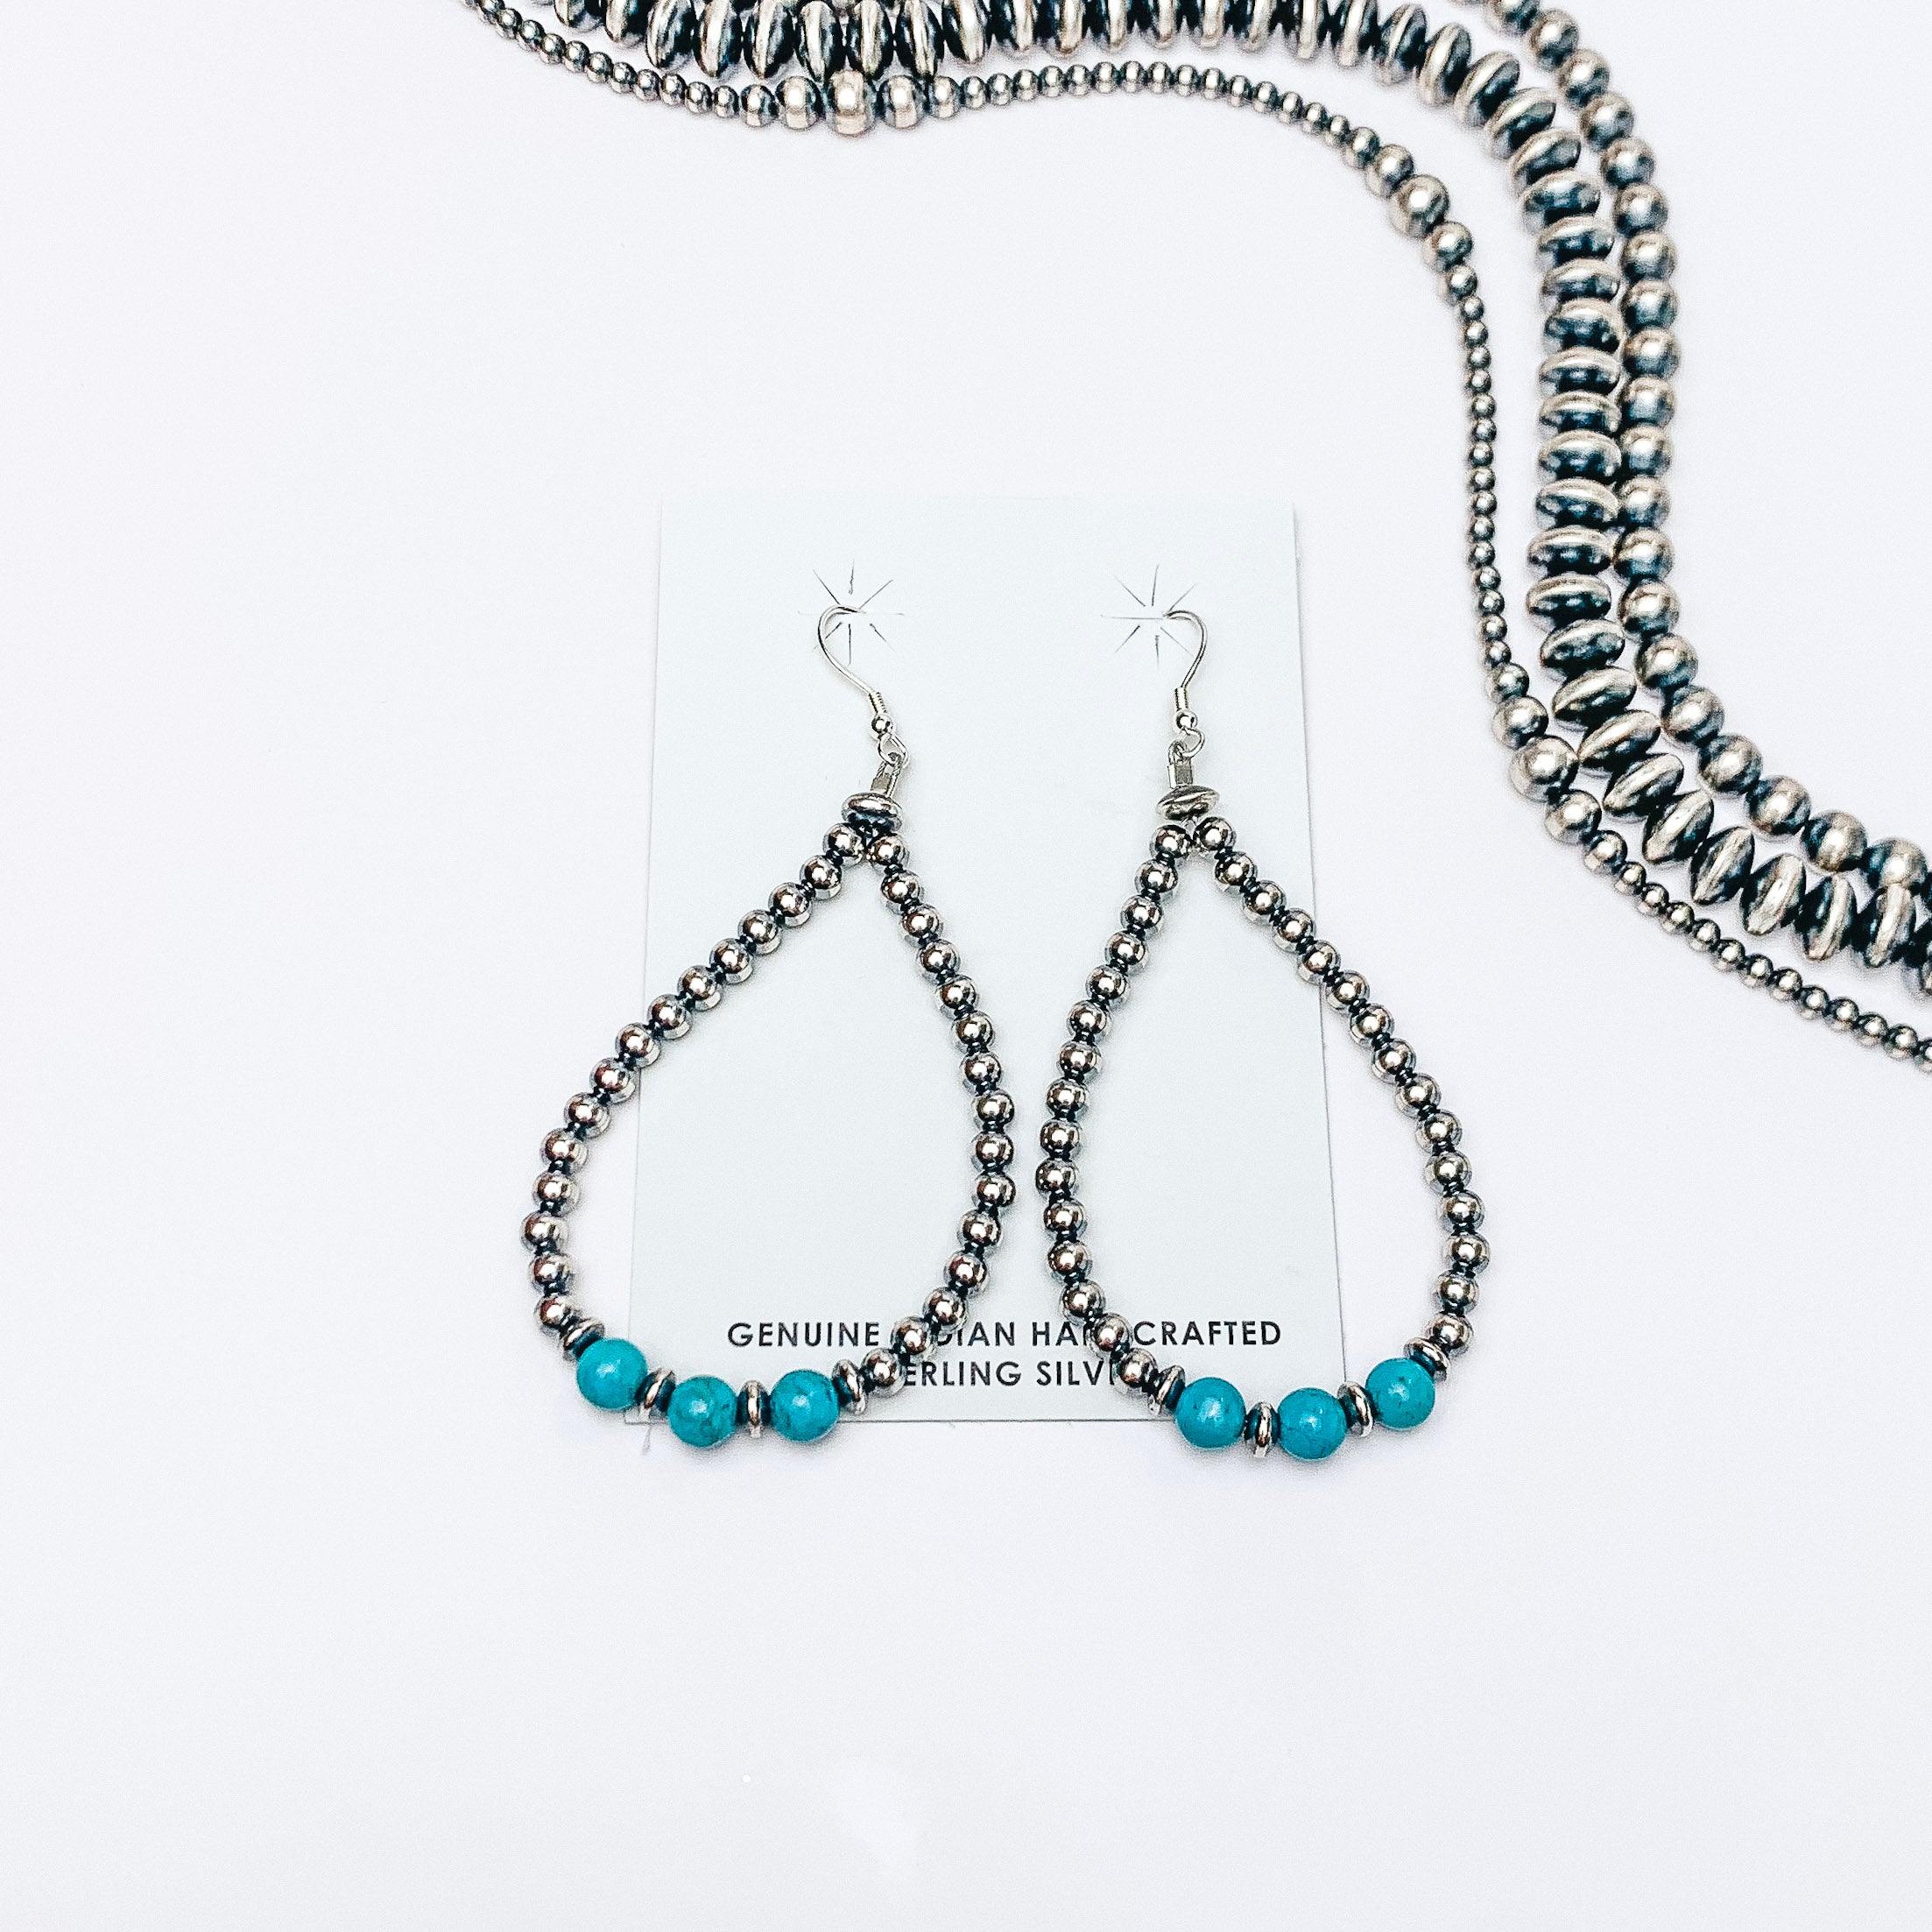 Centered in the picture is tear drop earrings made from  navajo pearls and sleeping beauty turquoise. Navajo pearls are laid above the earrings on white background. 